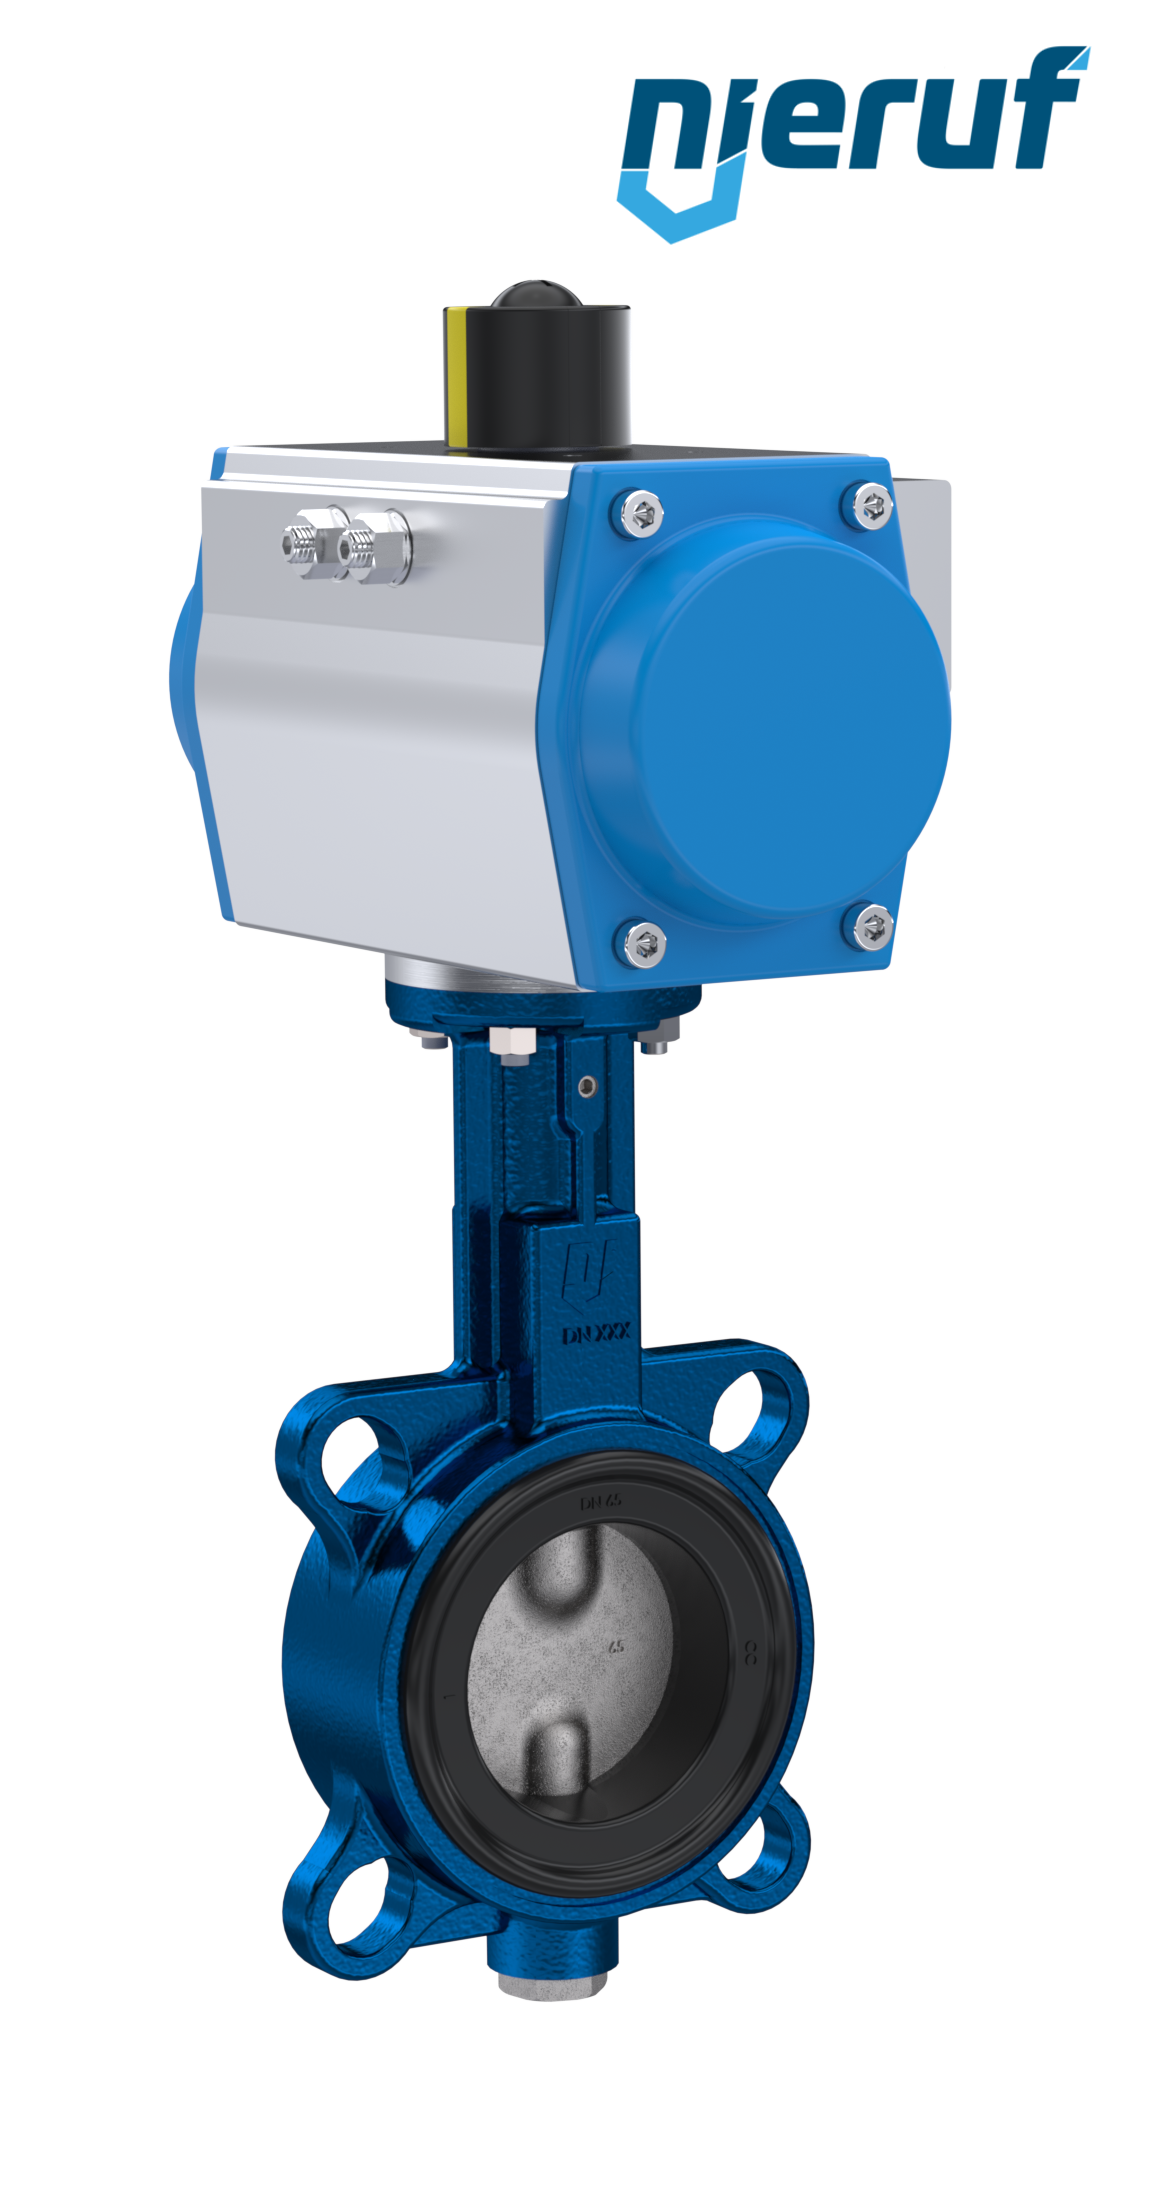 Butterfly valve DN 40 AK01 EPDM DVGW drinking water, WRAS, ACS, W270 pneumatic actuator single acting